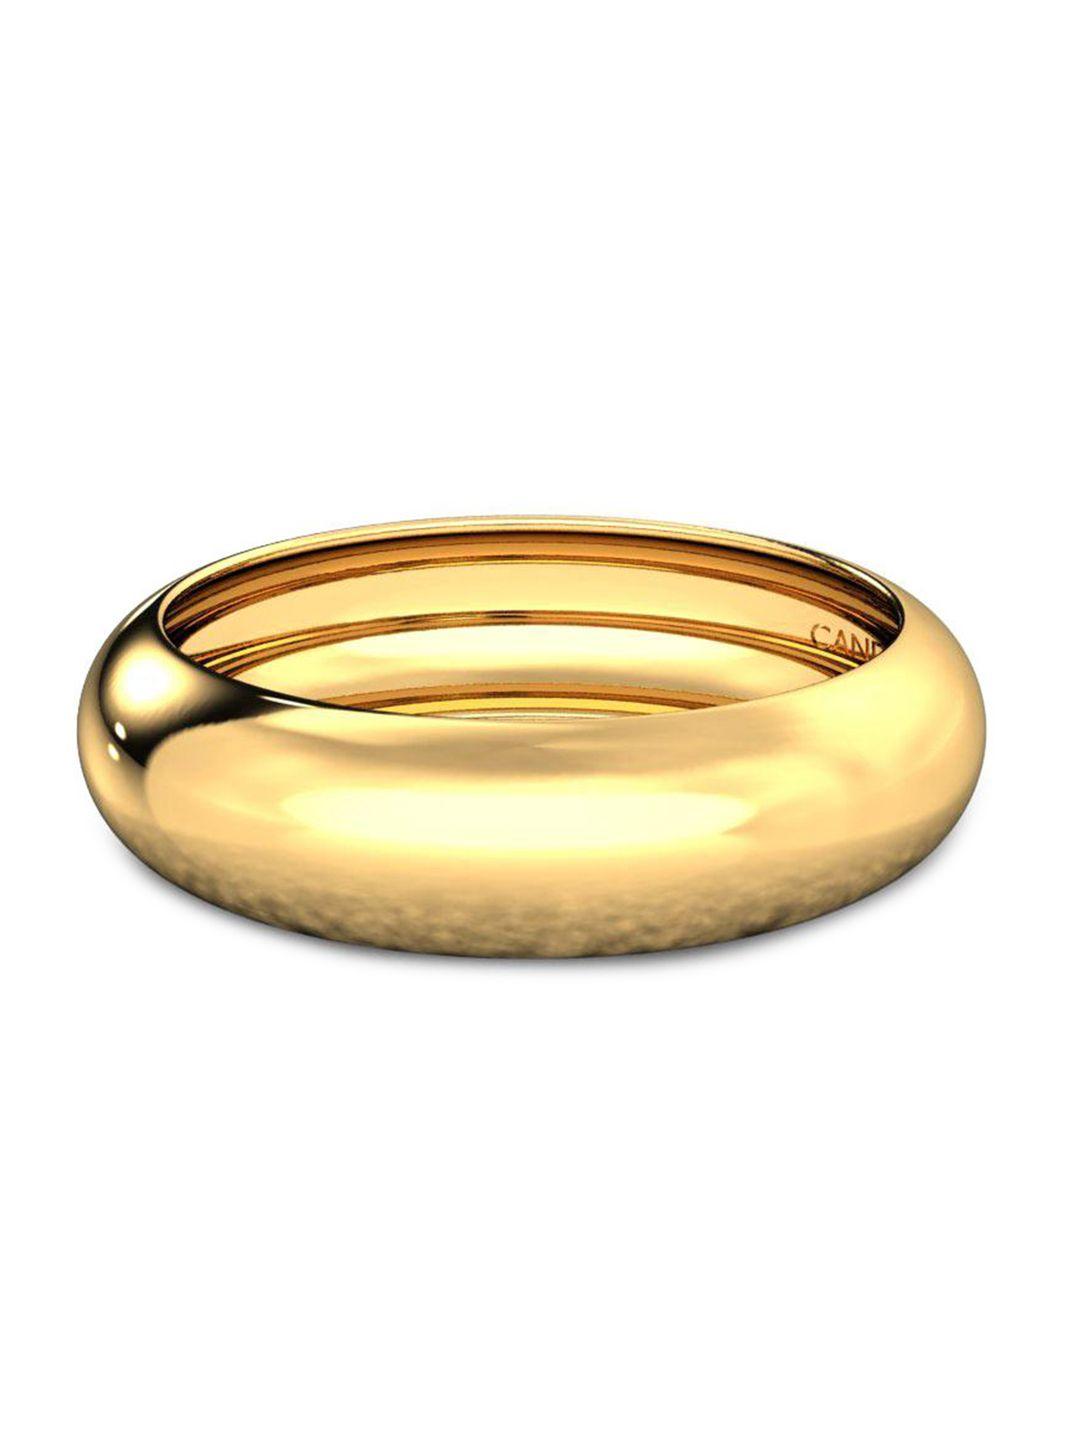 CANDERE A KALYAN JEWELLERS COMPANY 18KT Gold Ring-1.85gm